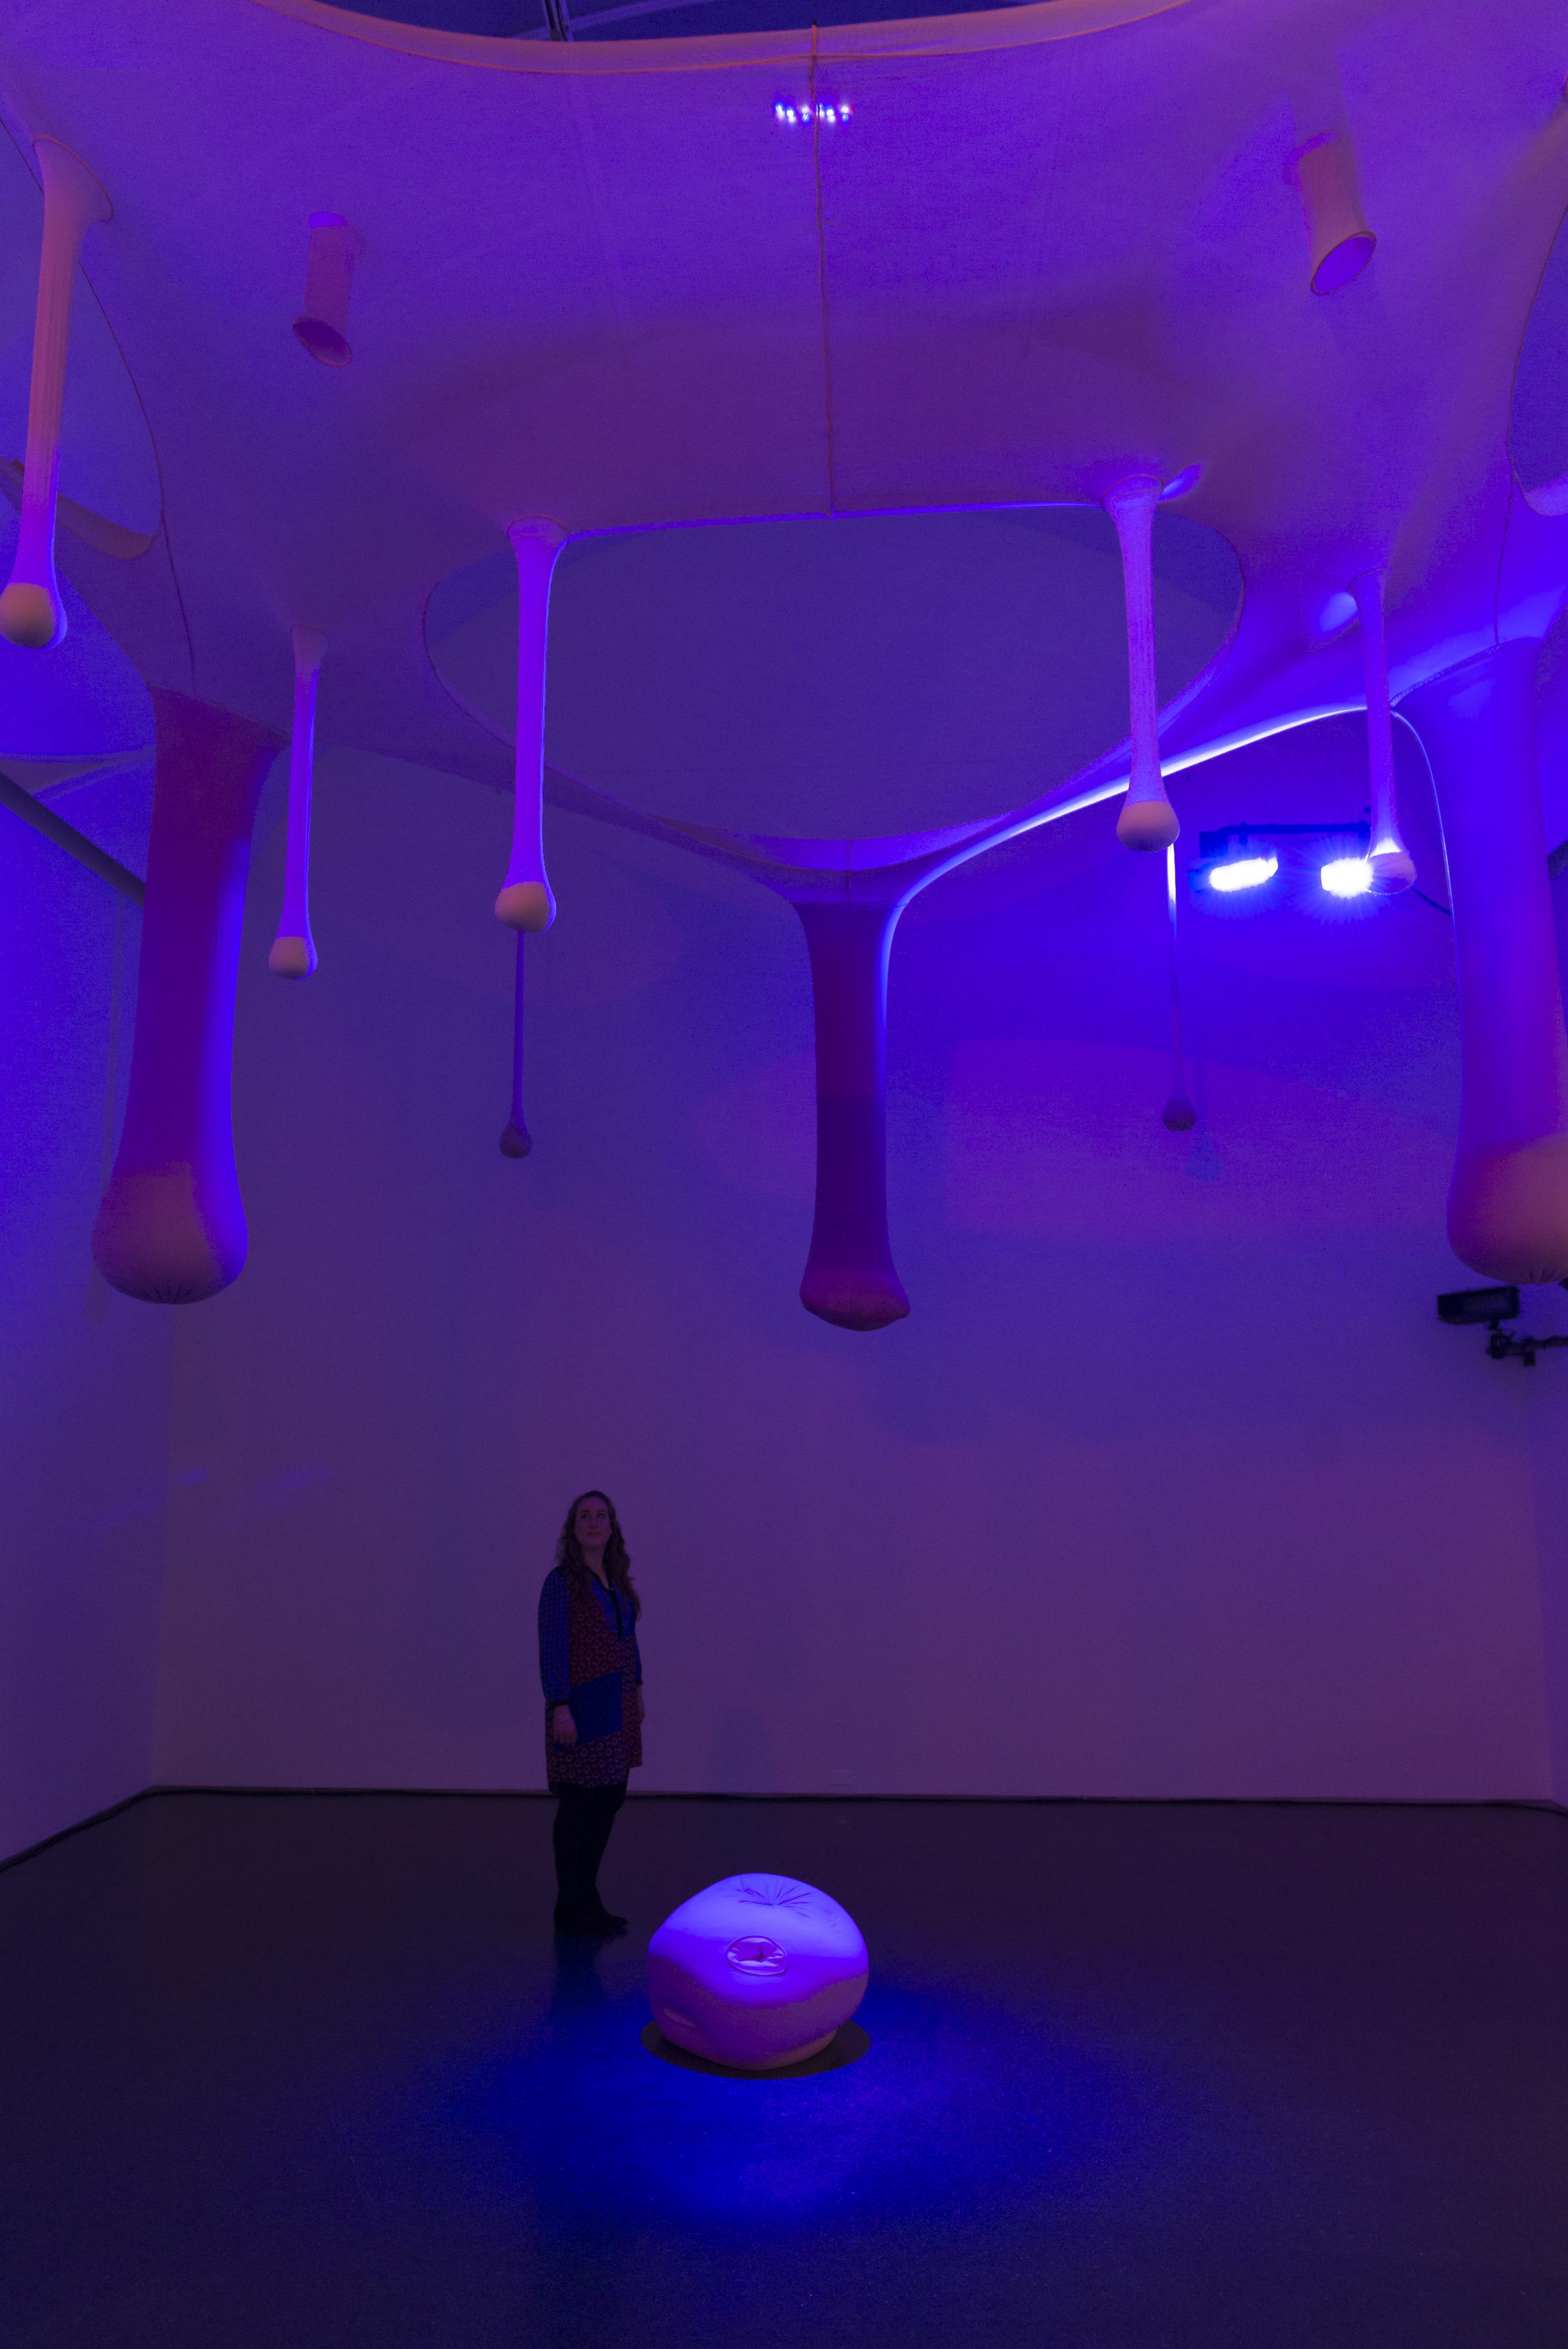 Organic oblong shapes hang from a suspended fabric in a room that glows purple and blue. A woman looks up at them, while standing next to a round purple object on the floor.